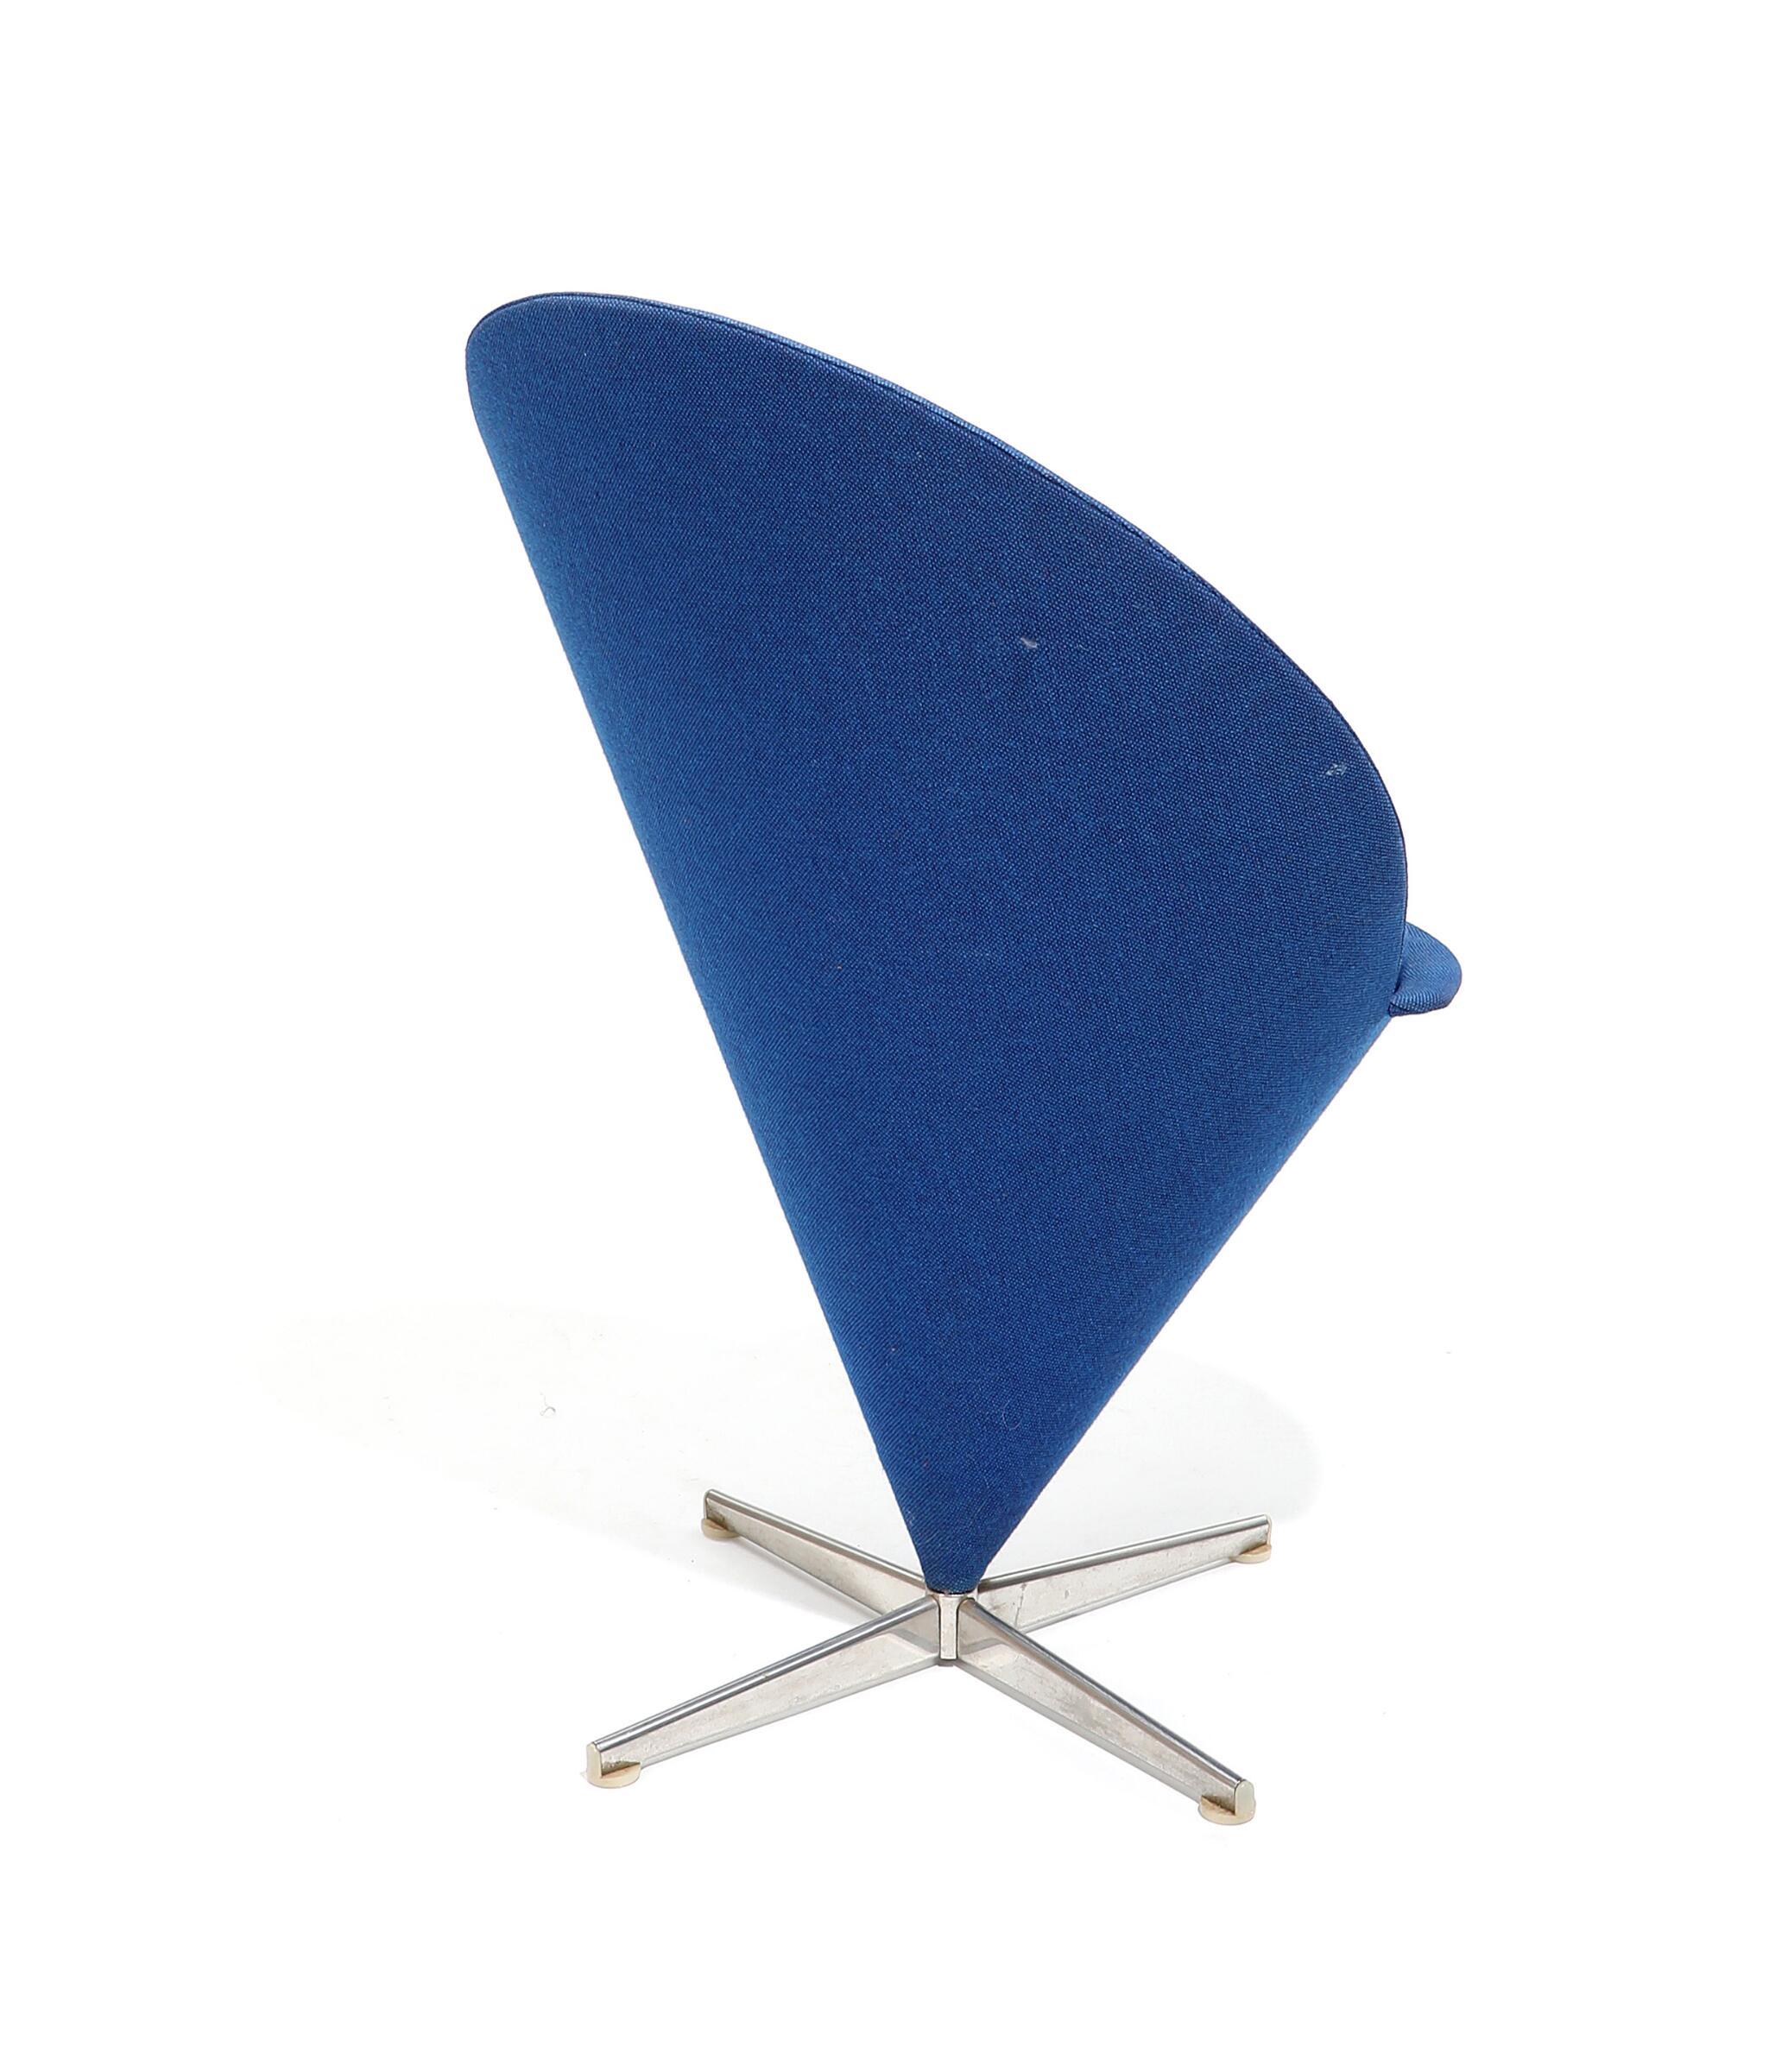 Mid-Century Modern Early Edition Verner Panton Blue Cone Chair Made by Plus Line, 1958 For Sale